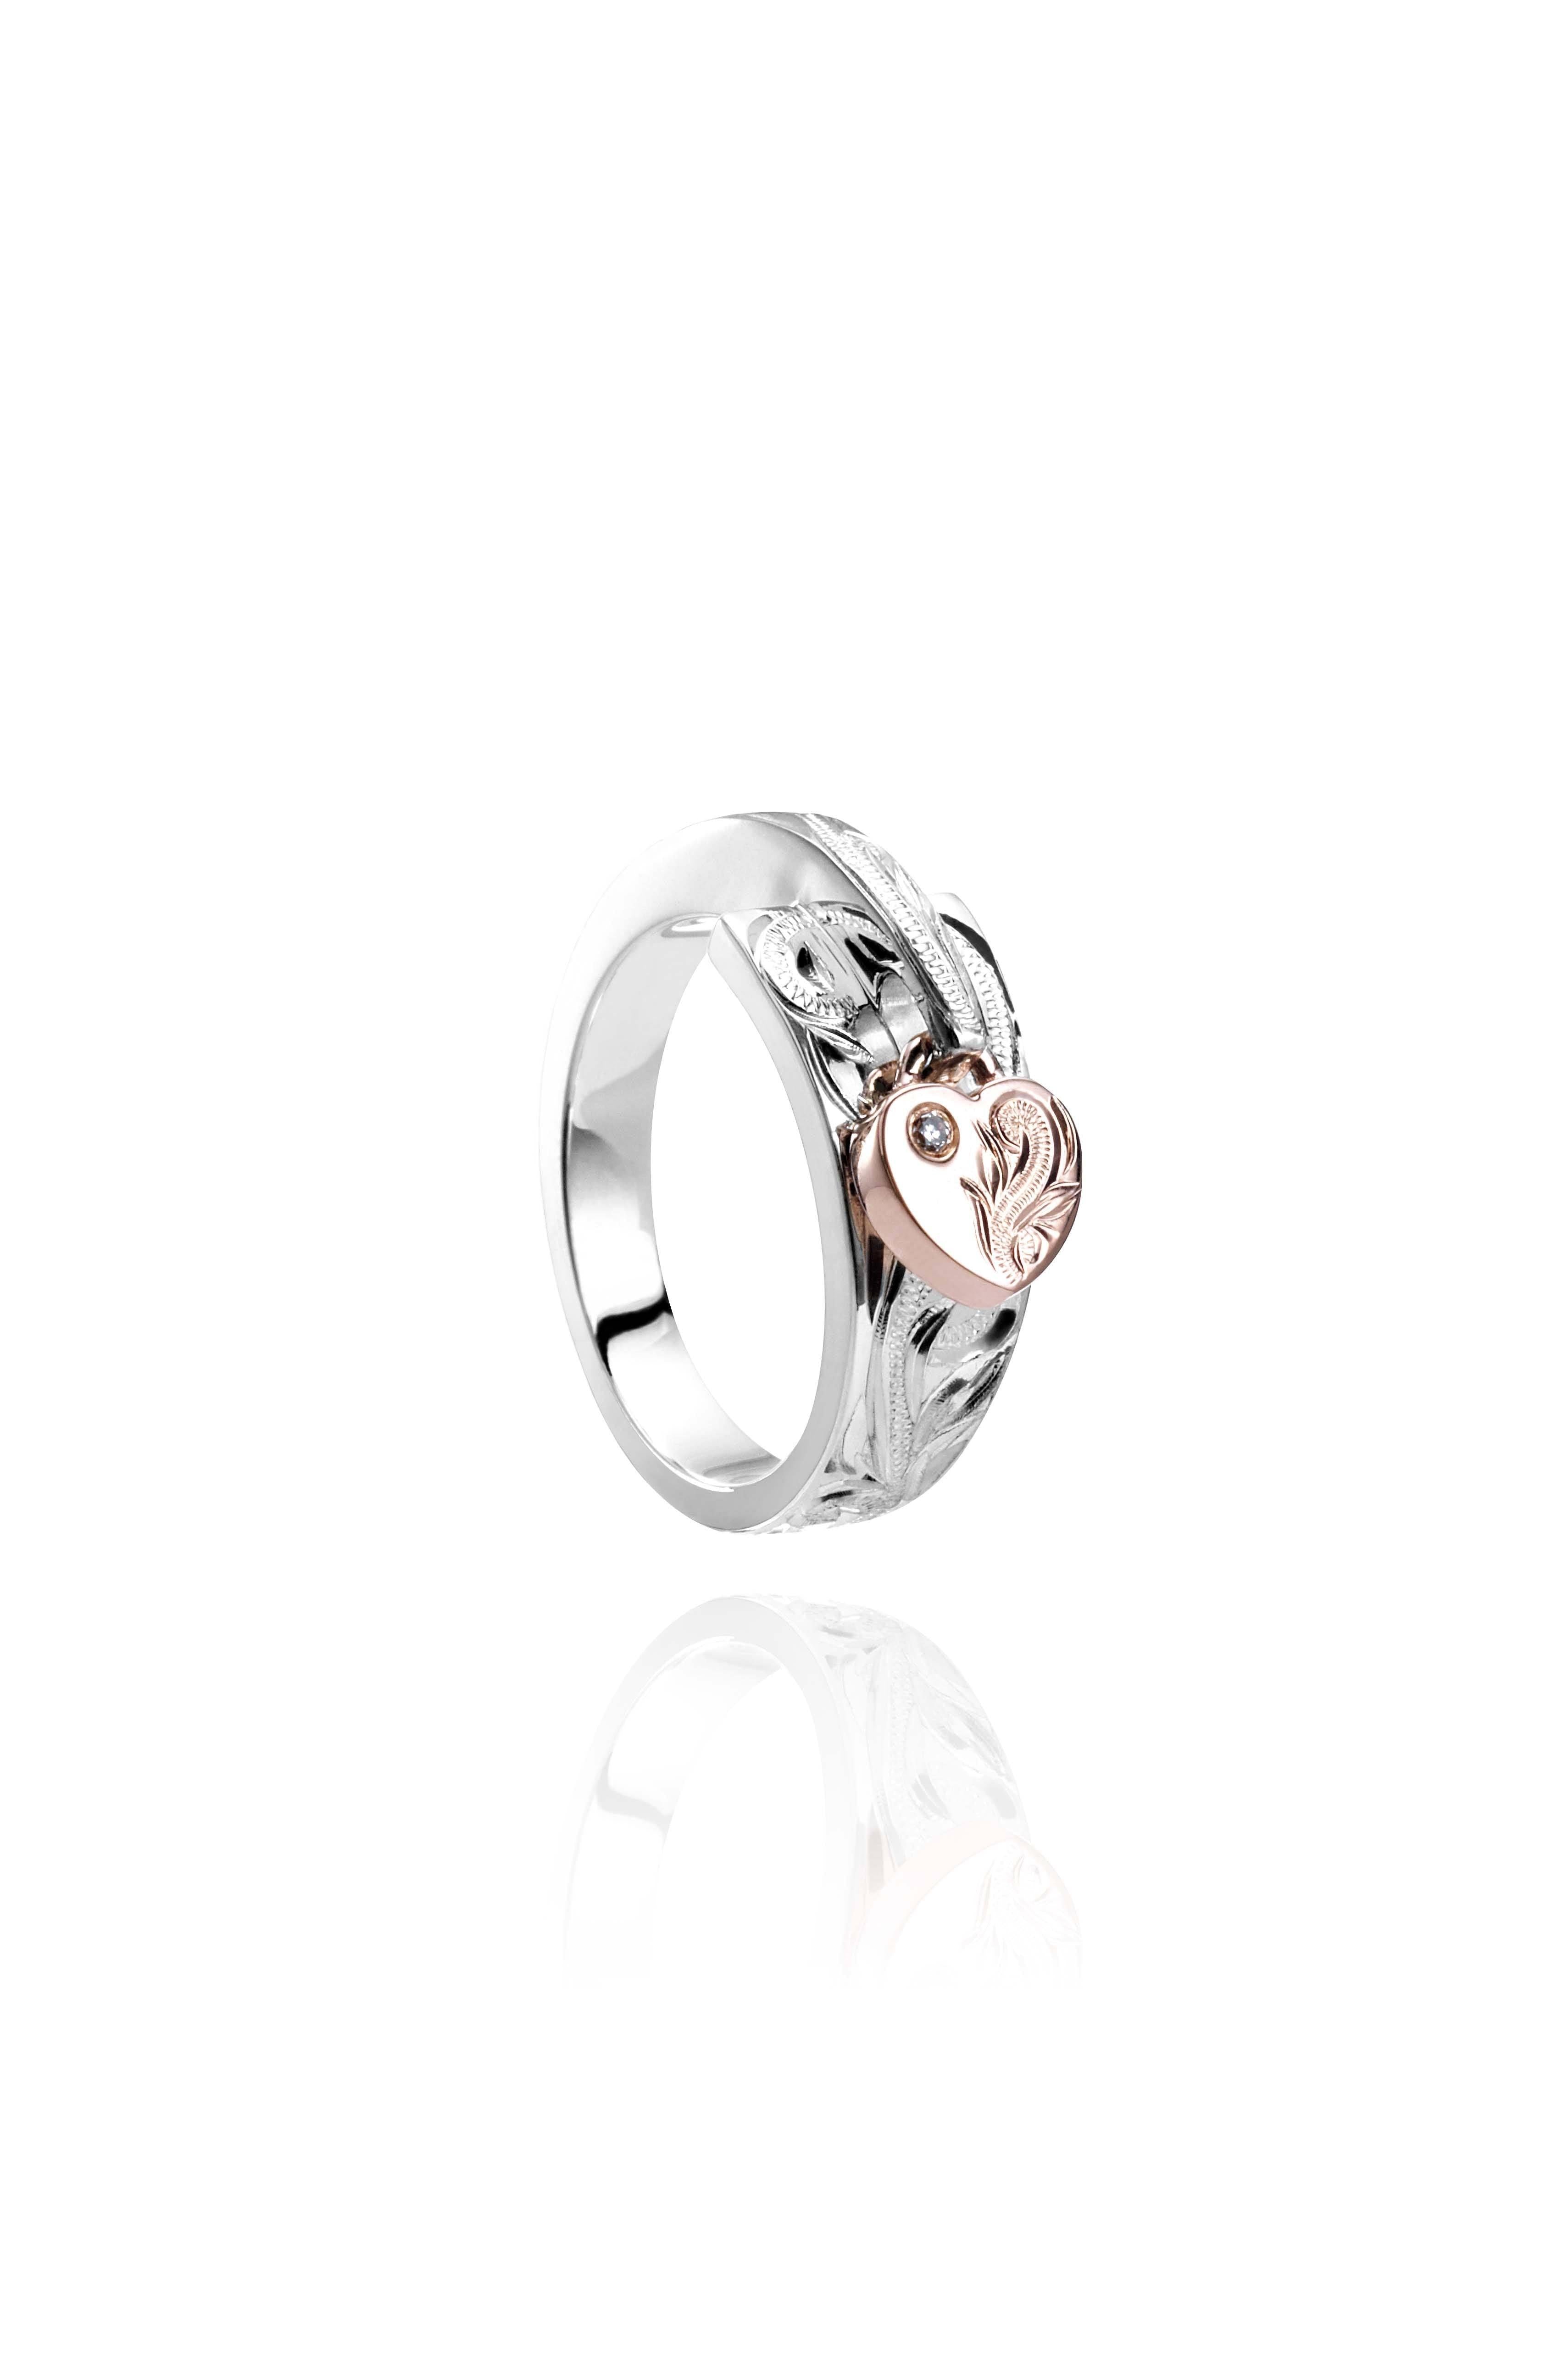 The picture shows a 14K rose gold and 925 sterling silver two-tone heart wrap ring with hand-engravings and a diamond.